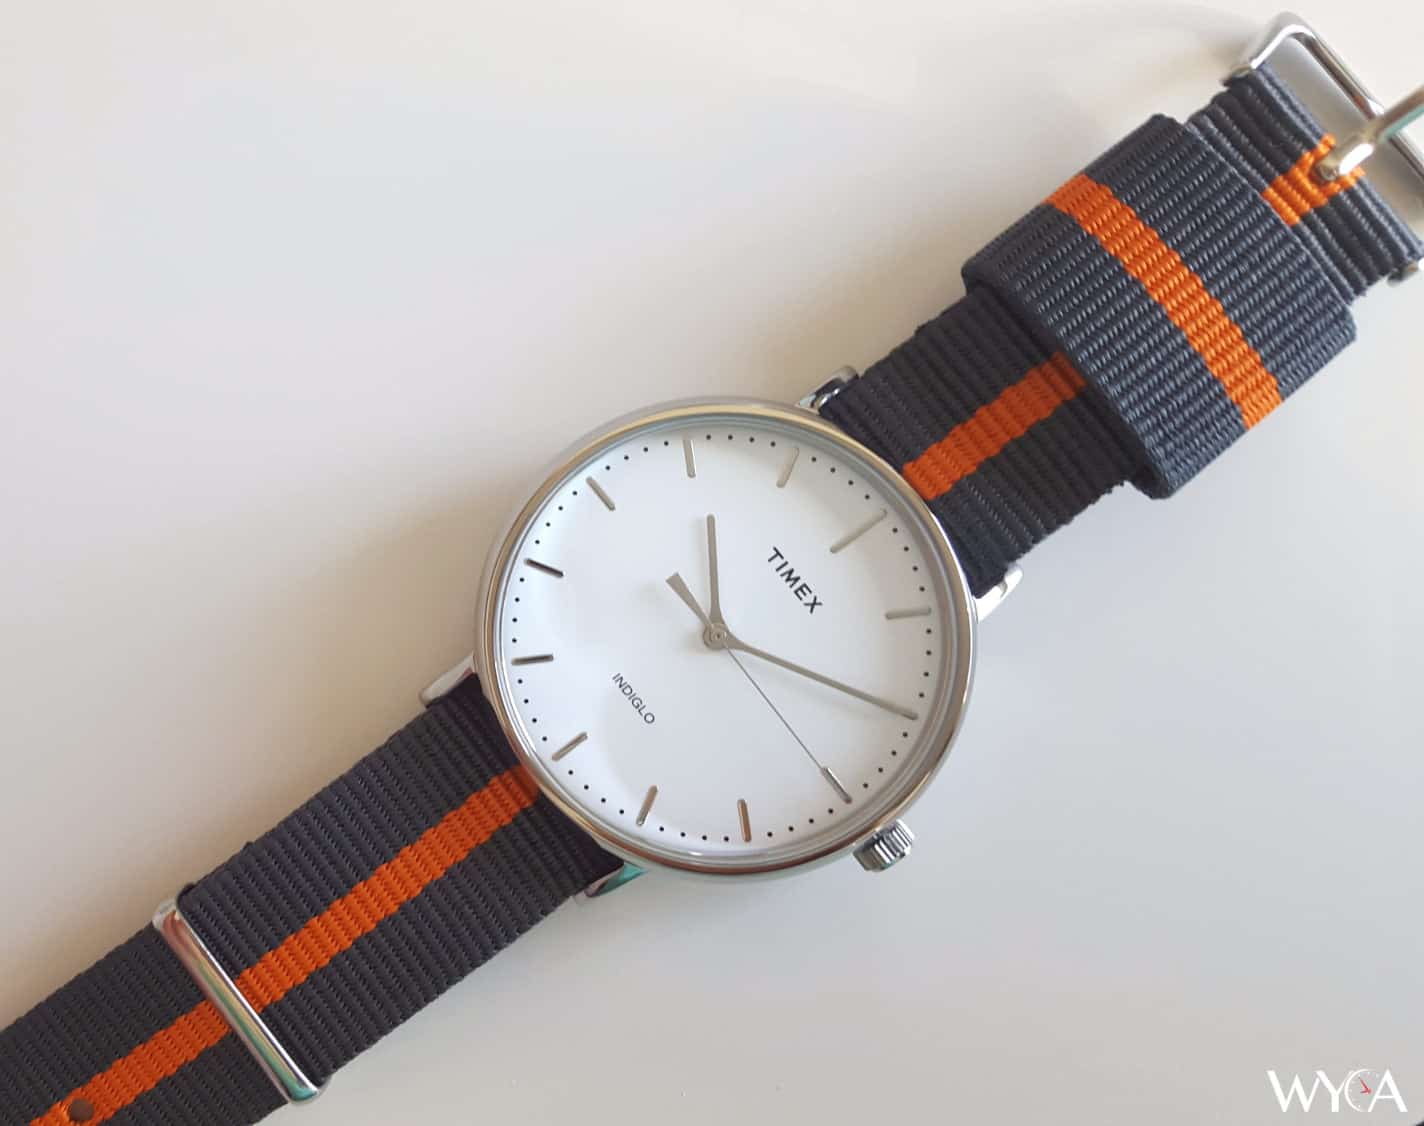 Barton Watch Bands Nato Strap Review | Watch Reviews | WYCA